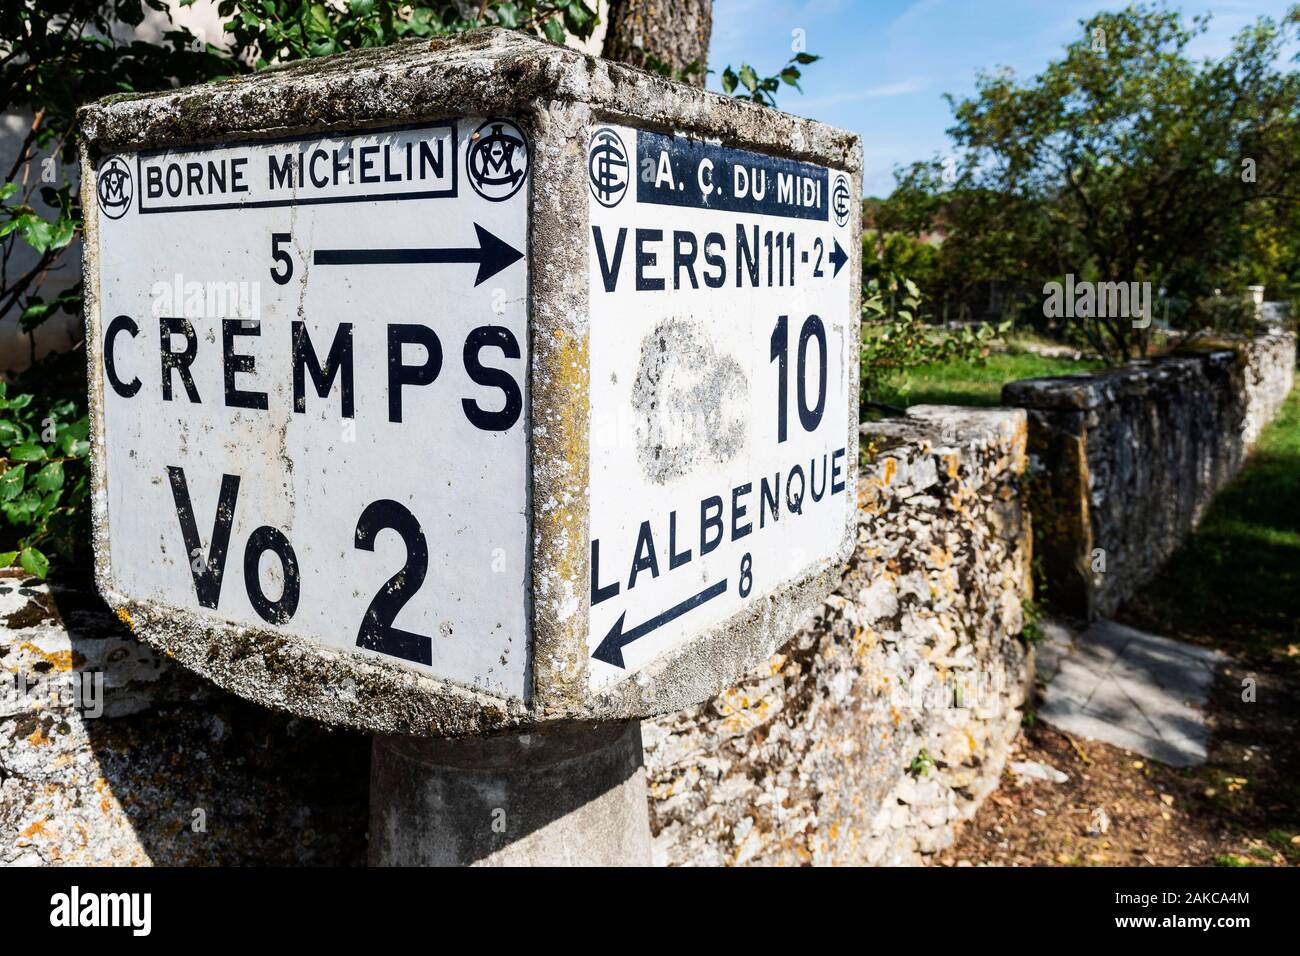 France, Occitania,Lot departement, old road sign by Michelin Stock Photo